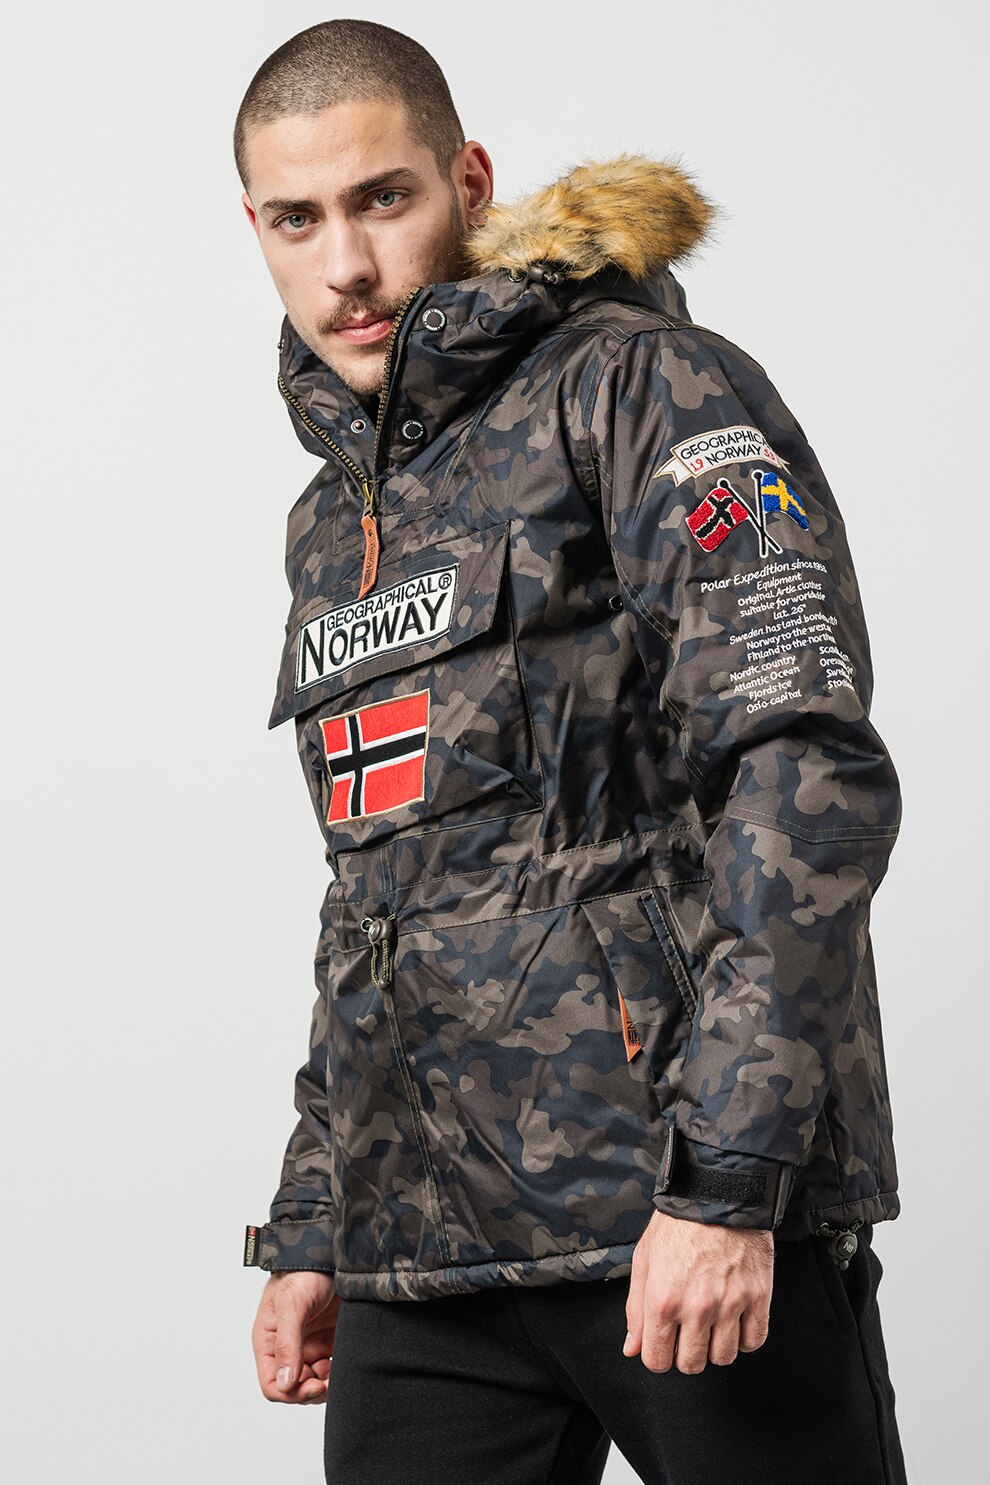 Geographical Norway BARMAN Kaki - Fast delivery  Spartoo Europe ! -  Clothing Parkas Men 78,40 €